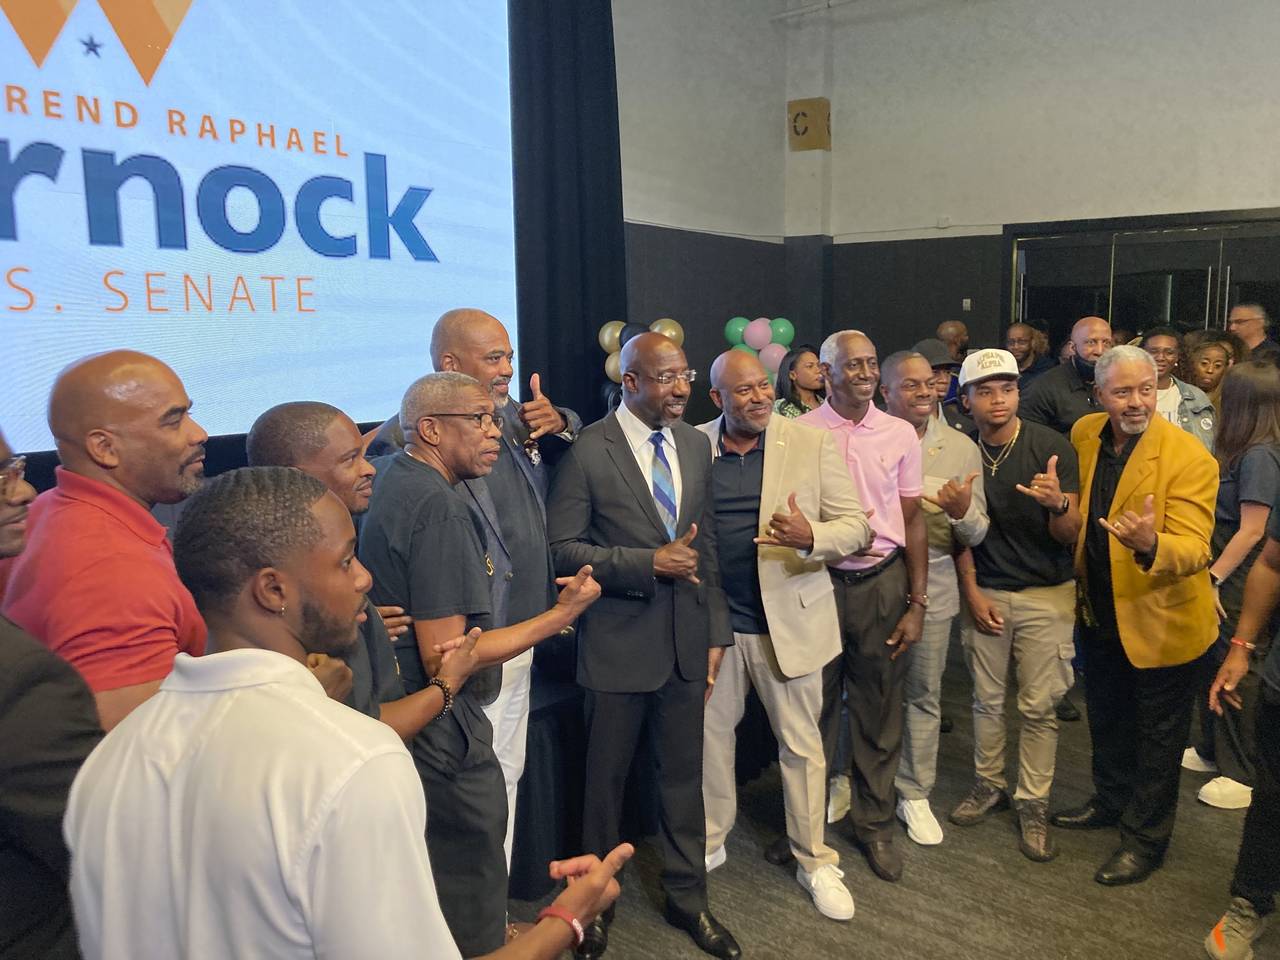 Georgia Sen. Raphael Warnock campaigns on Sept. 2, 2022, in Atlanta with other members of historica...